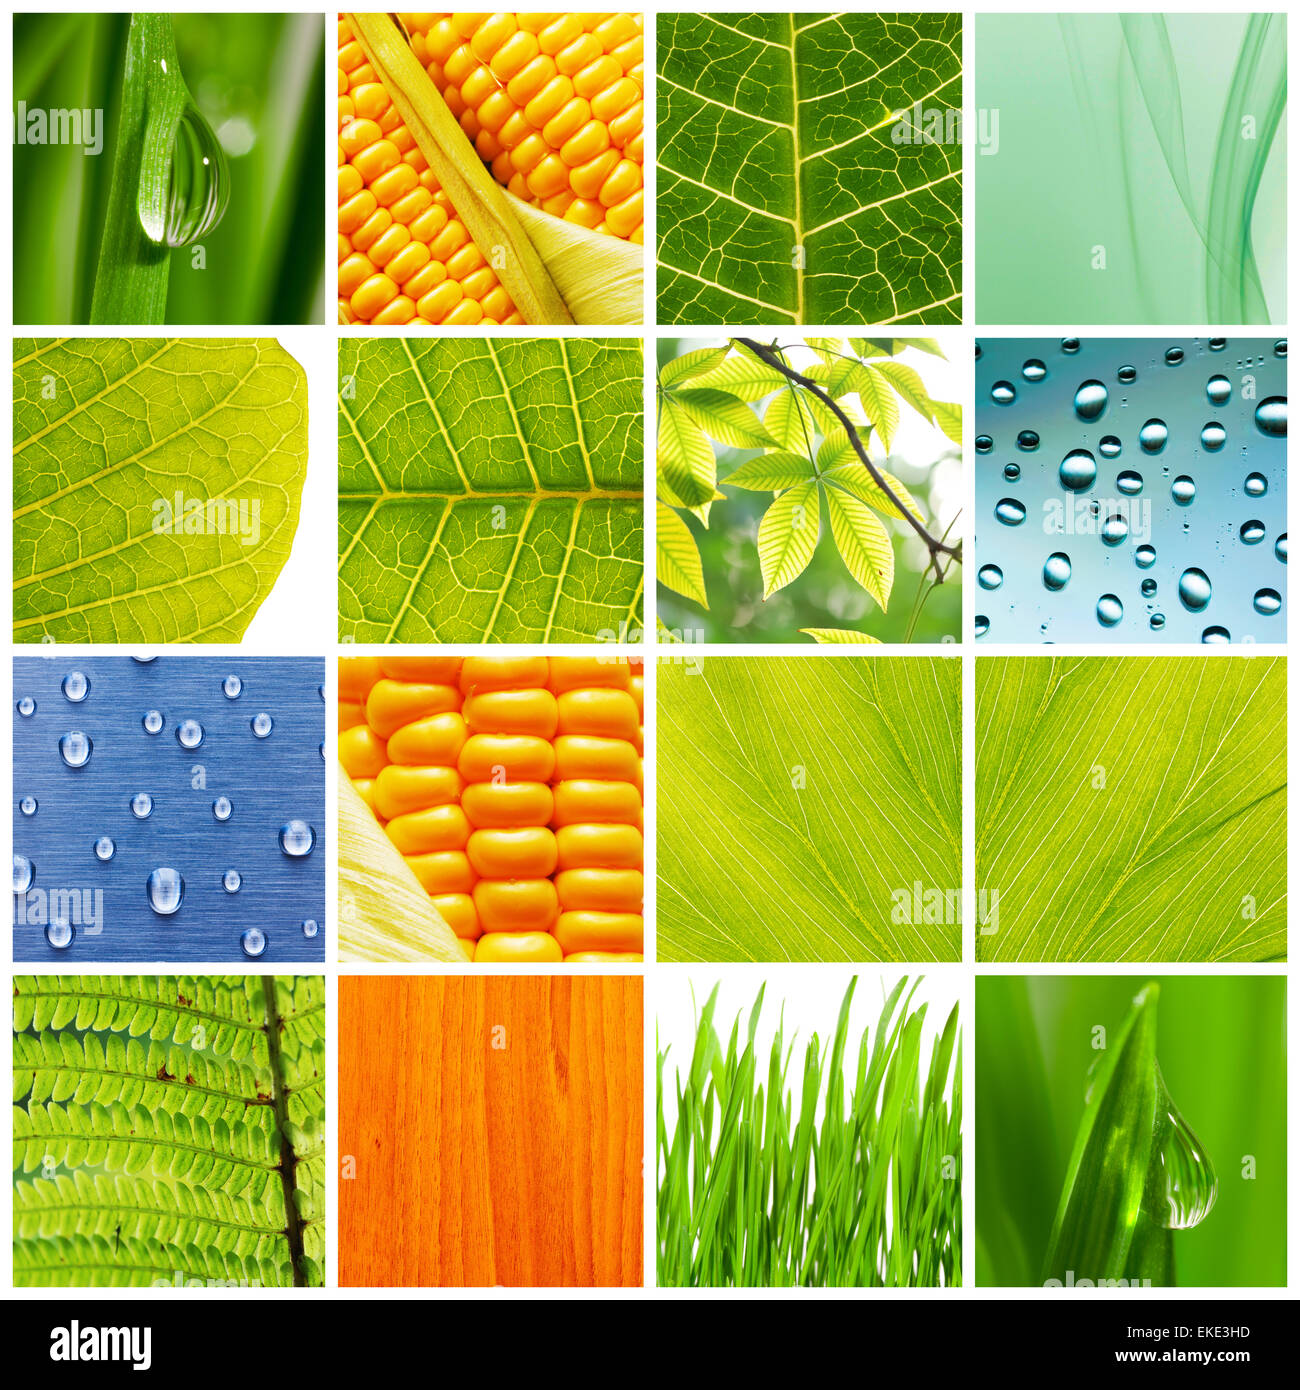 Nature collage Stock Photo